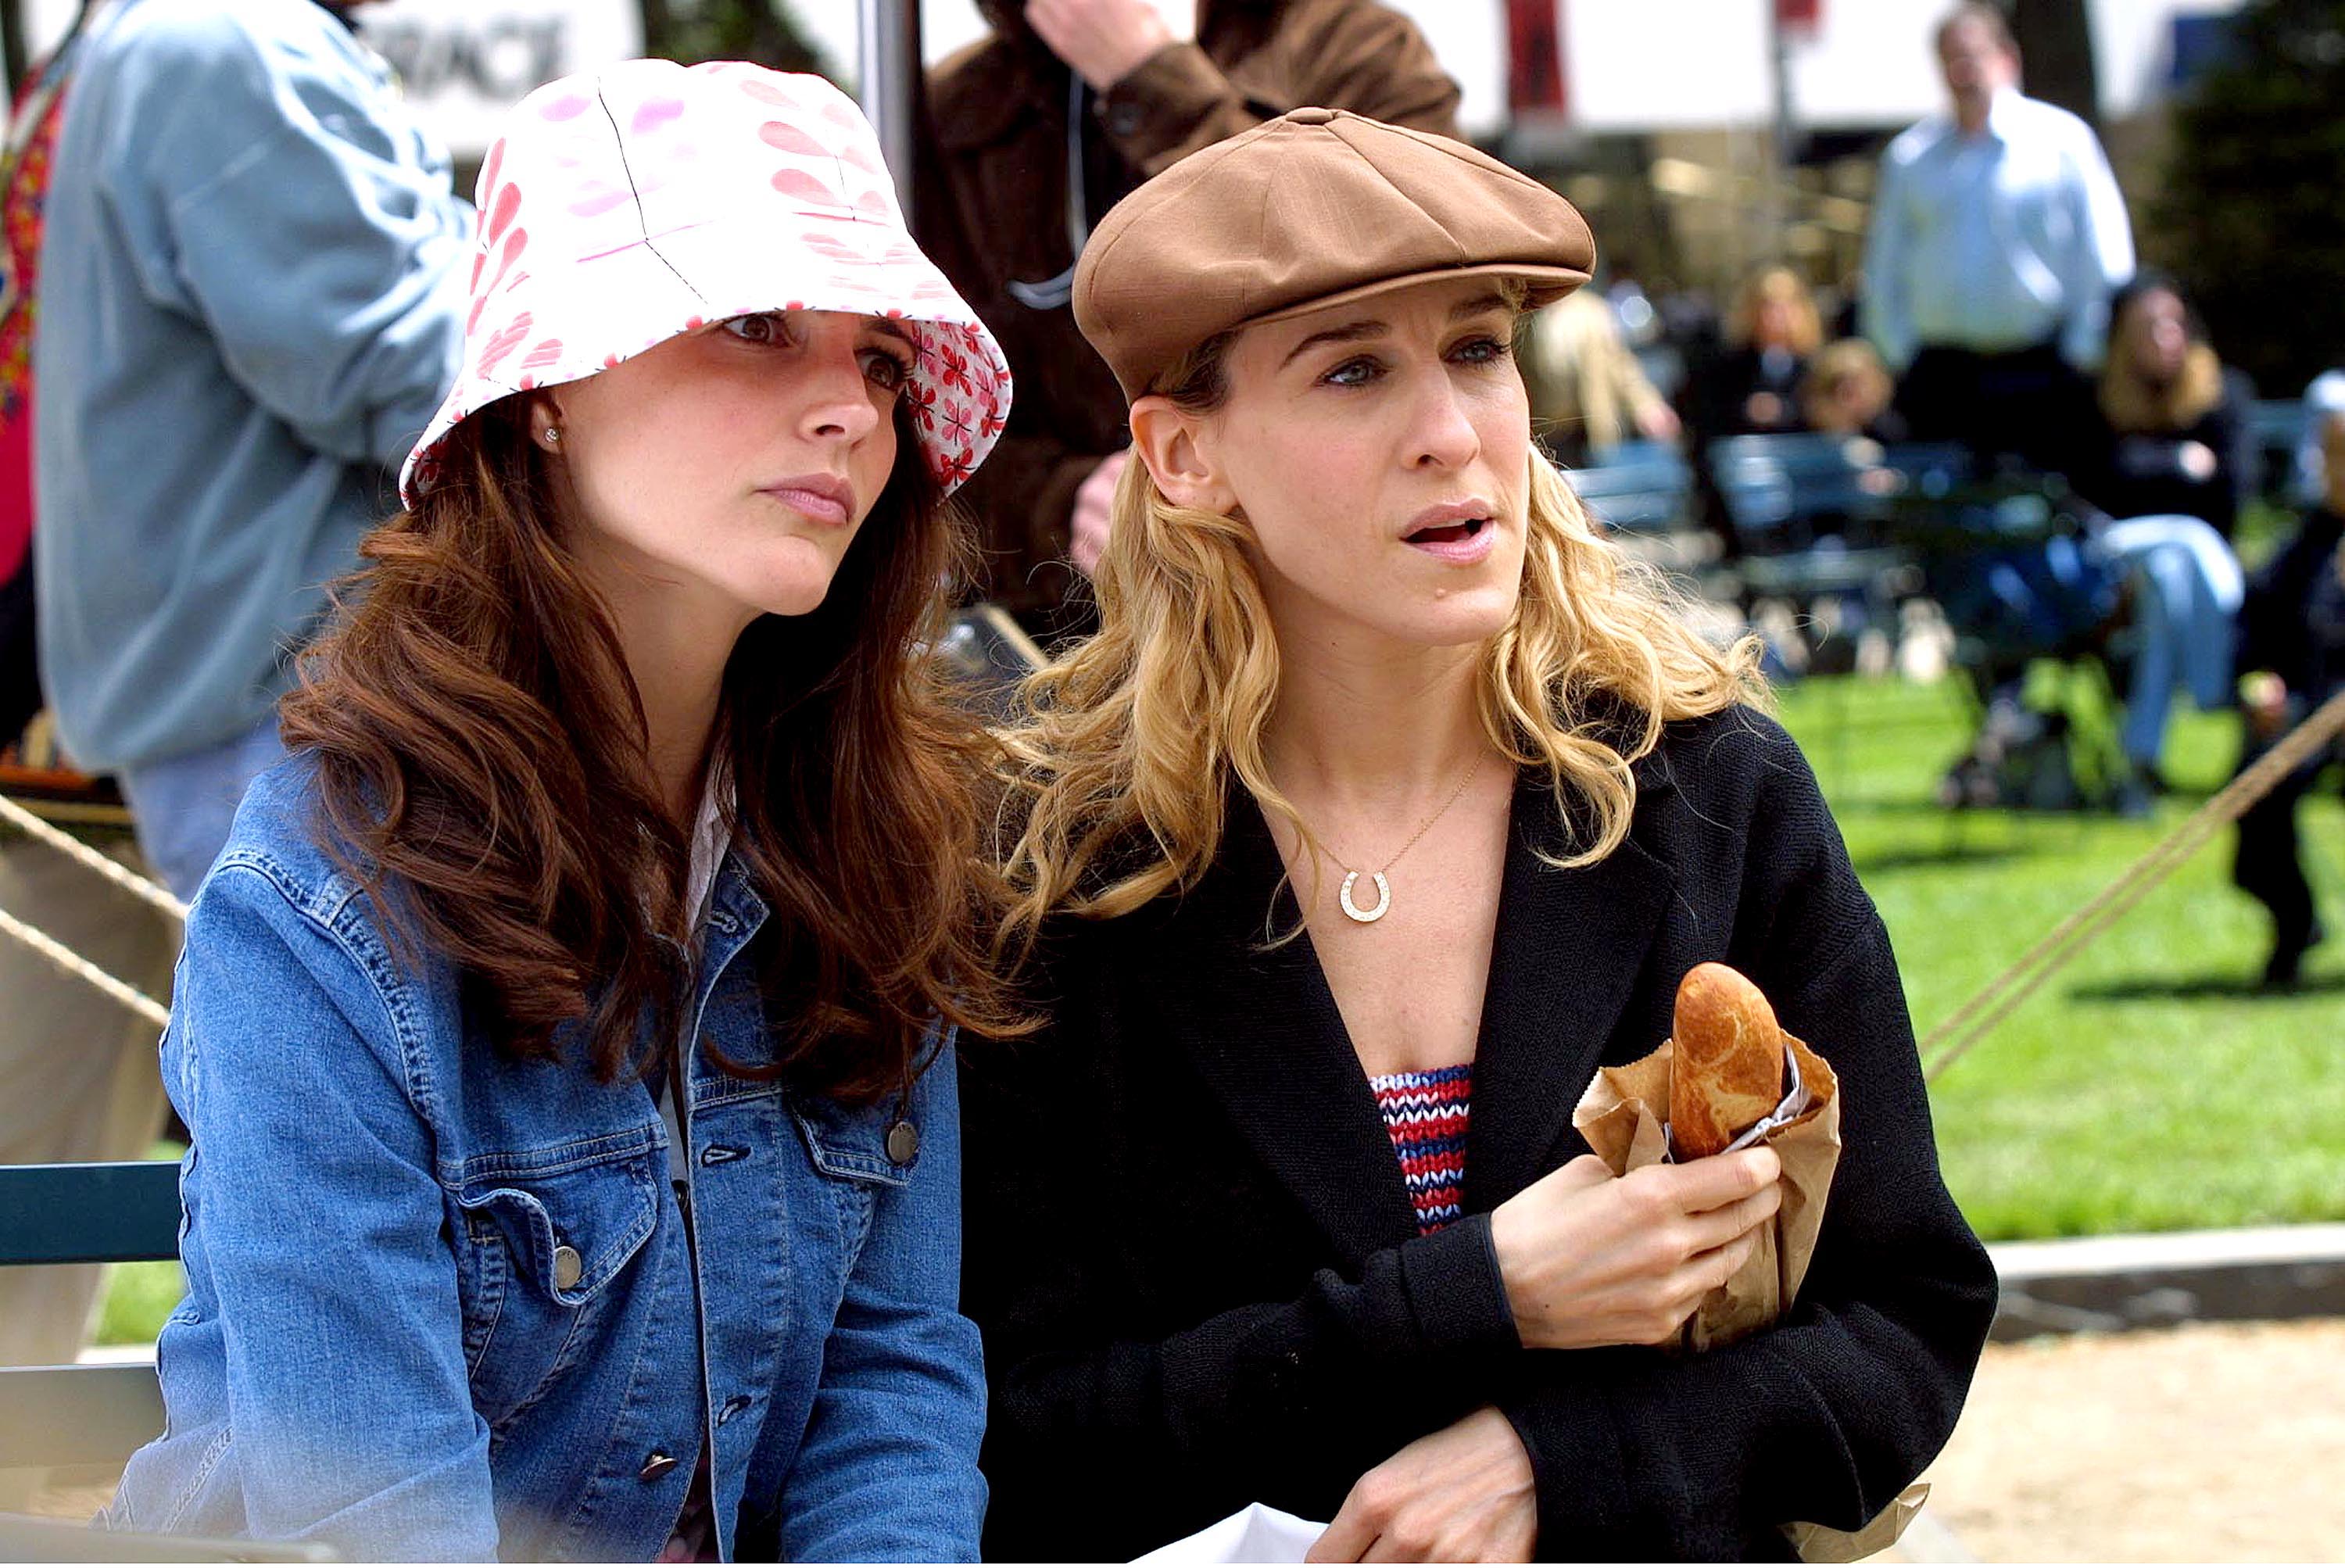 Kristin Davis as Charlotte York and Sarah Jessica Parker as Carrie Bradshaw on location for Sex and the City